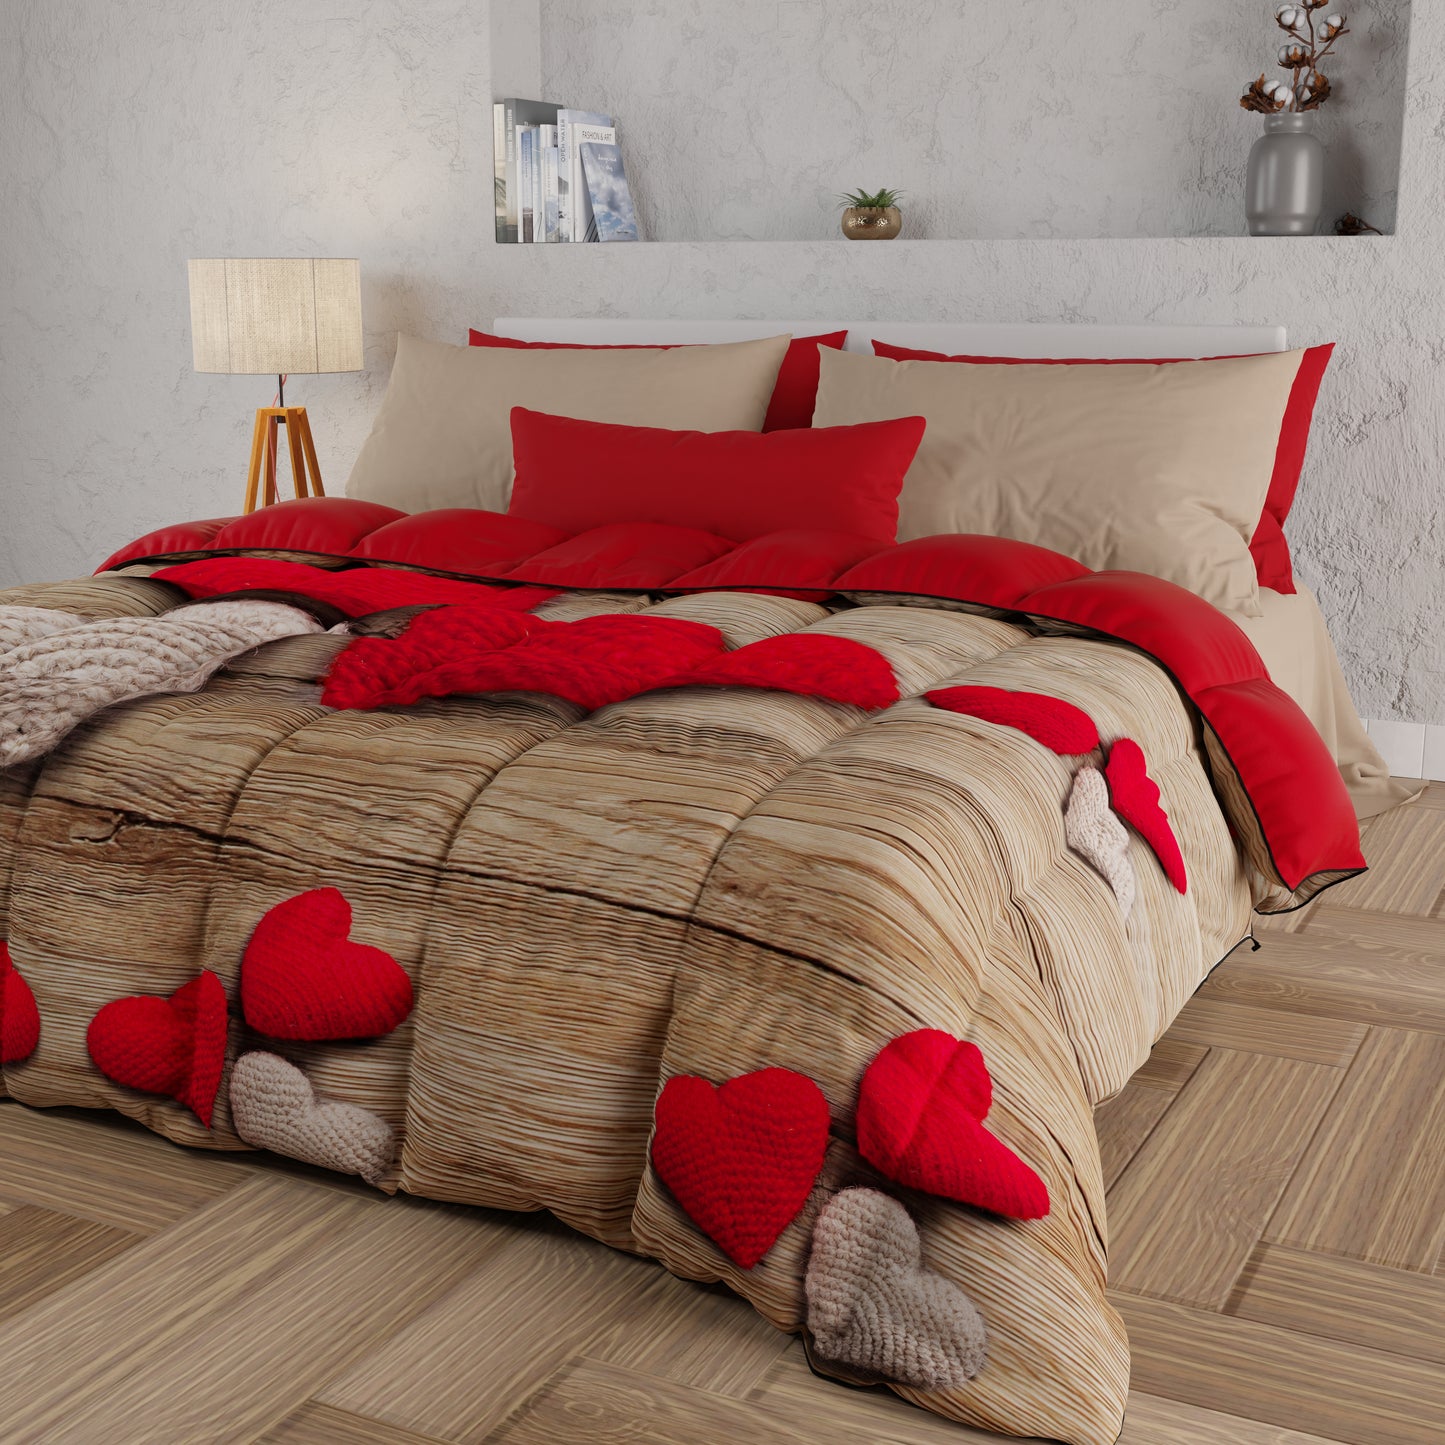 Duvet, Double Quilt, Single, Square and a Half, Heart